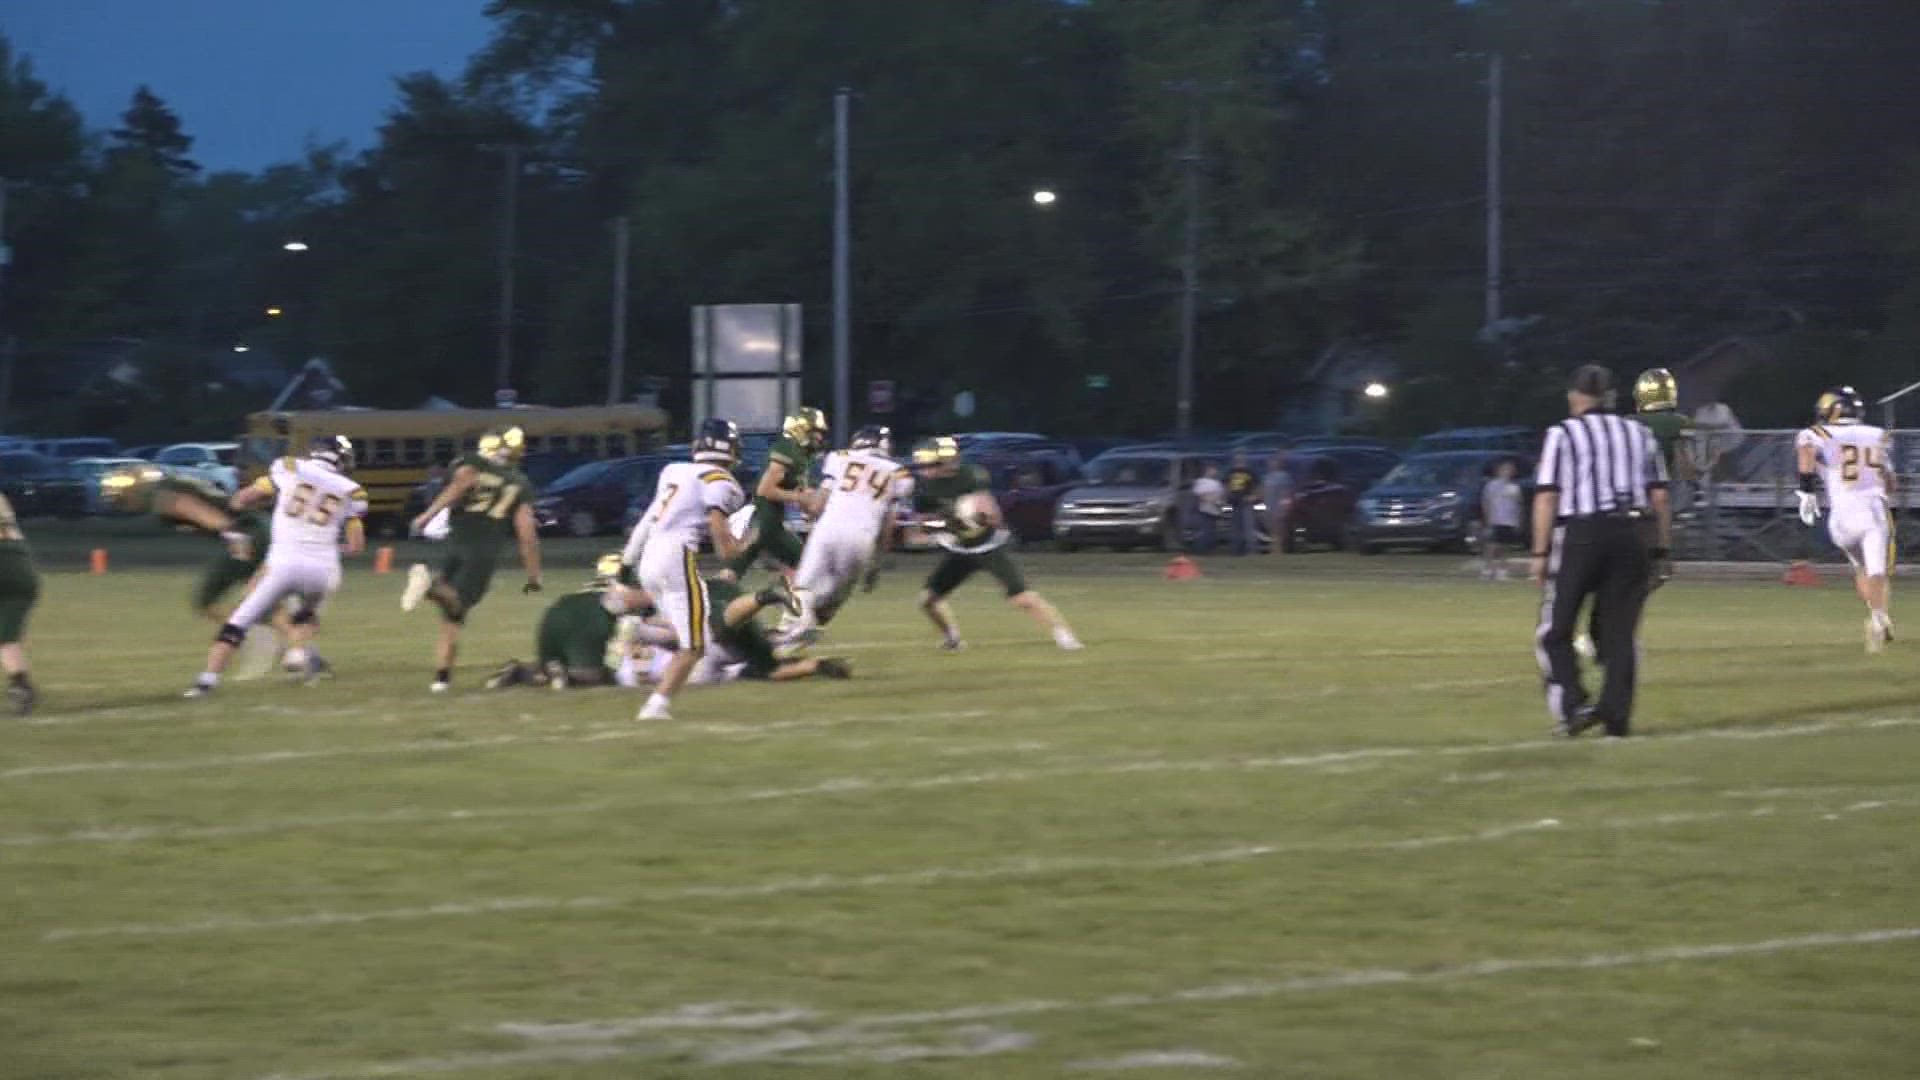 Muskegon catholic central opens the season with a 27-13 win.